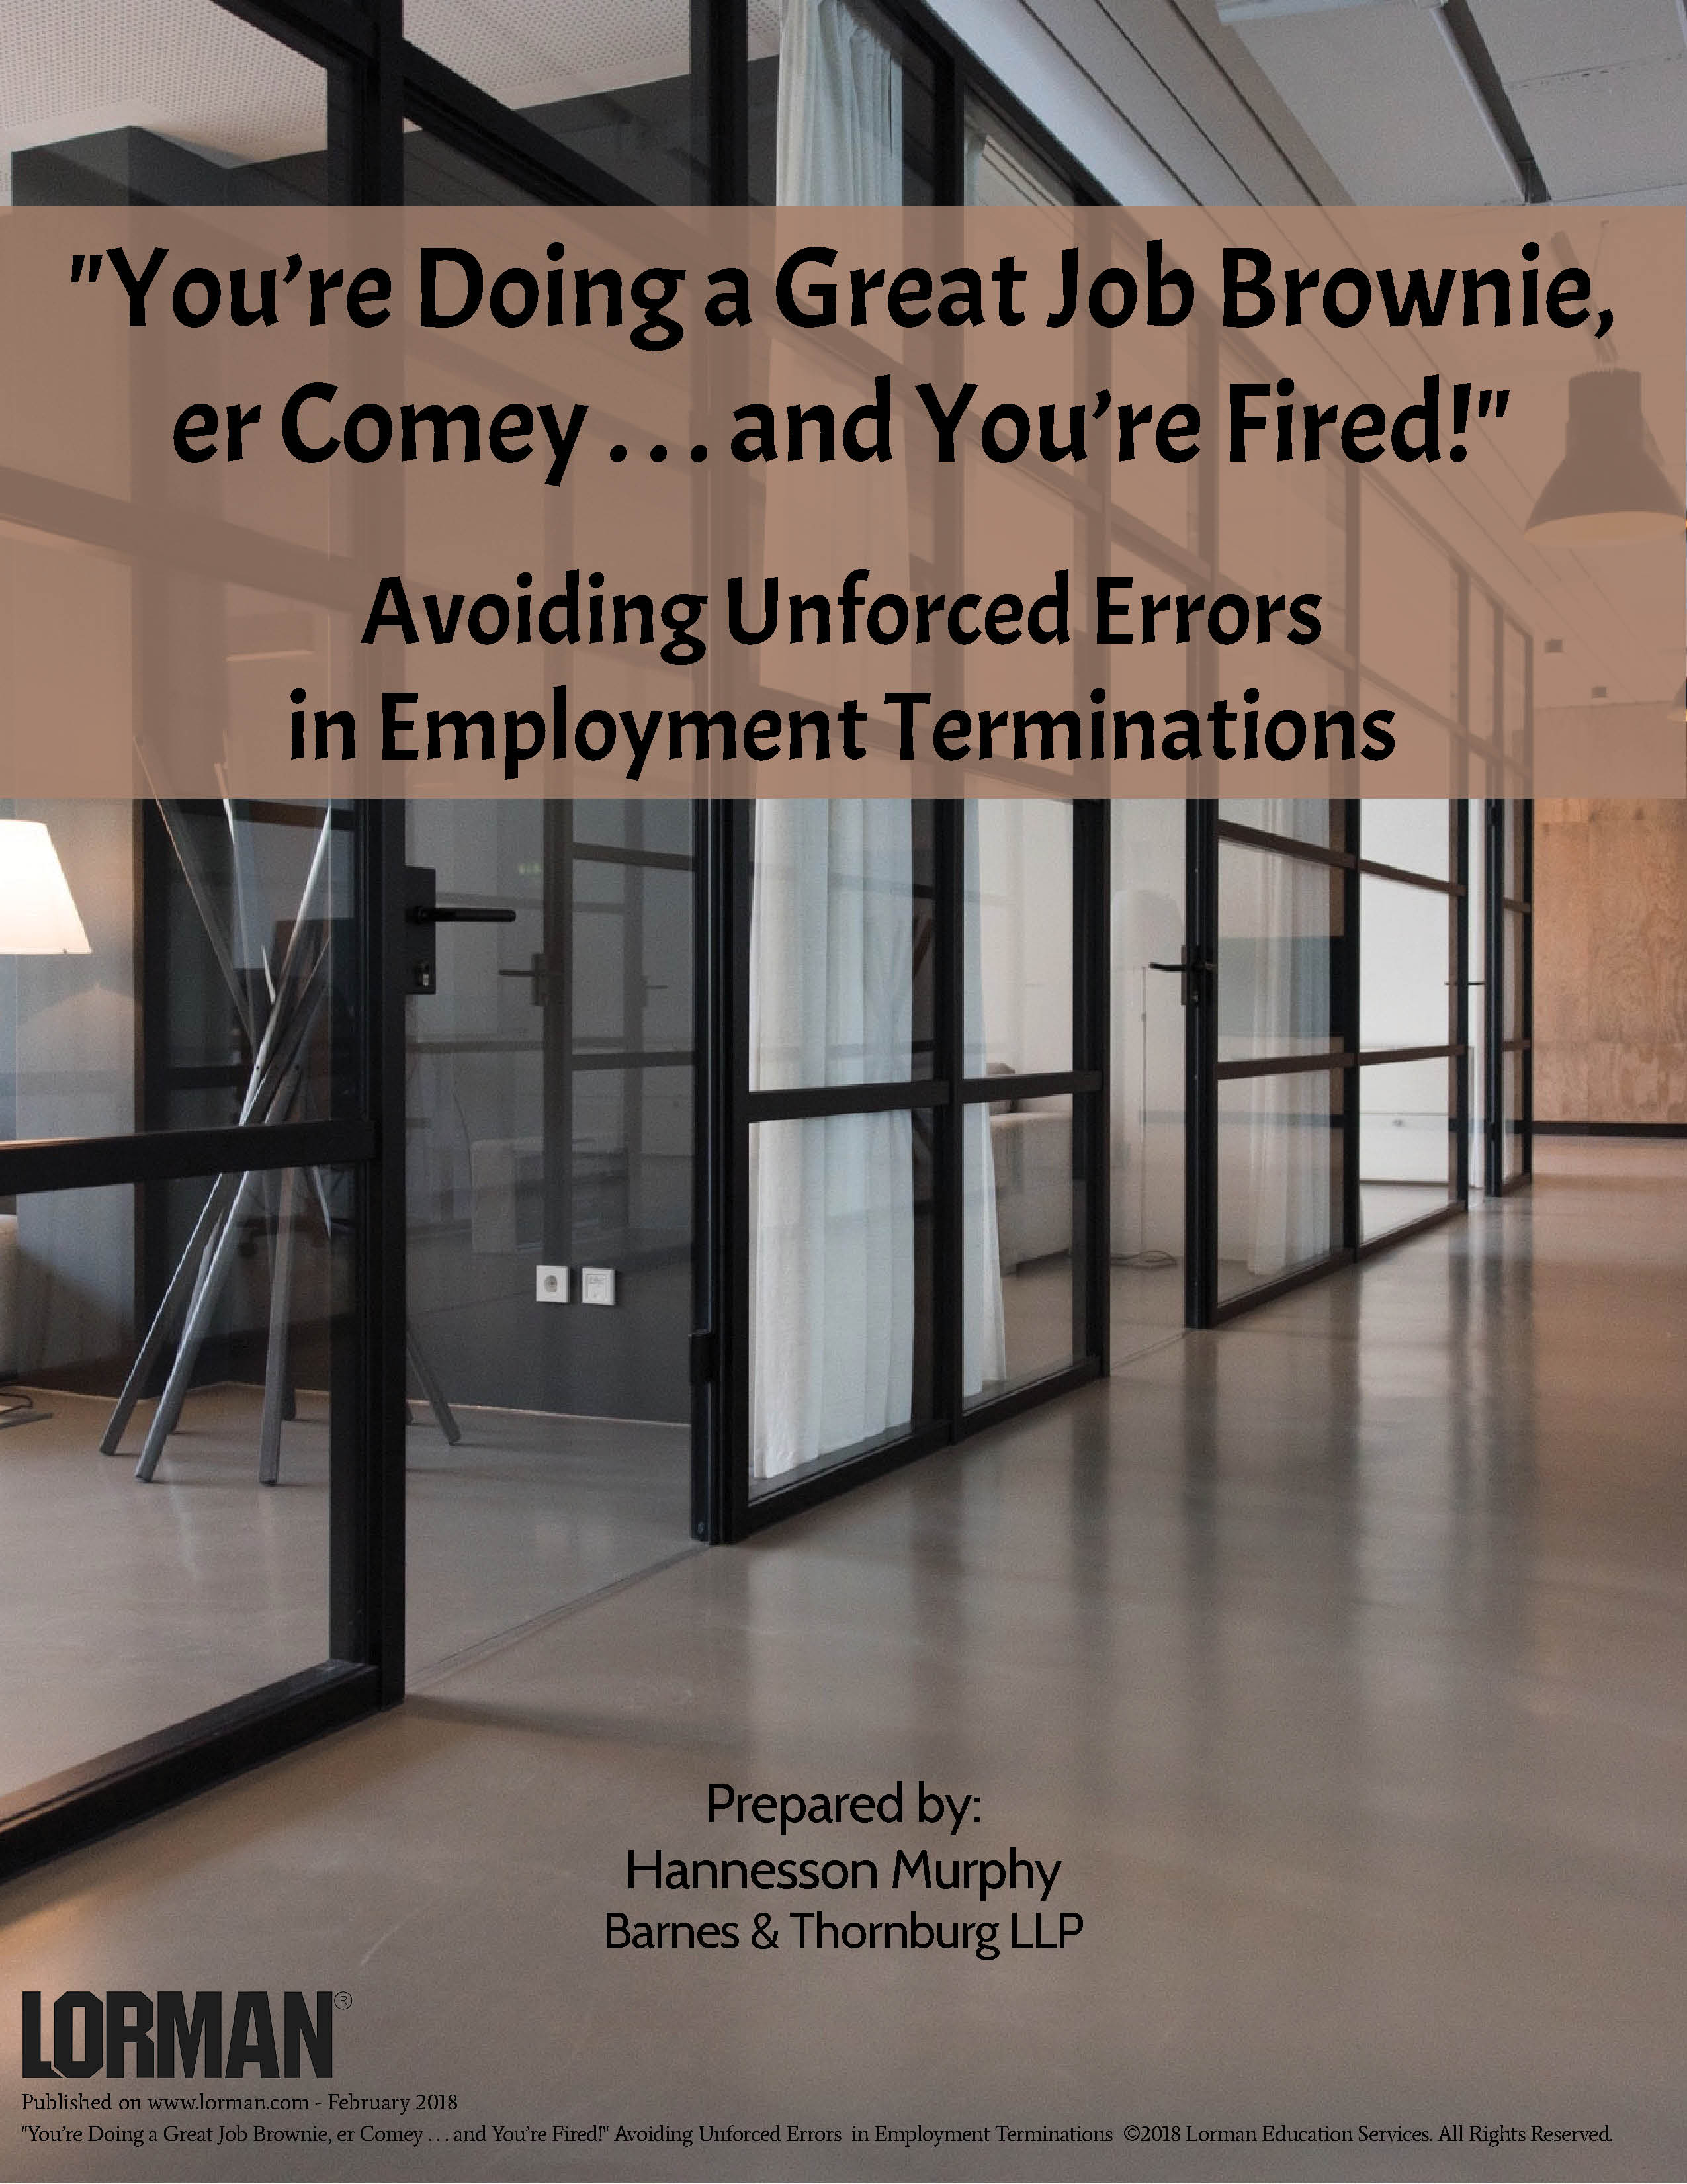 Avoiding Unforced Errors in Employment Terminations